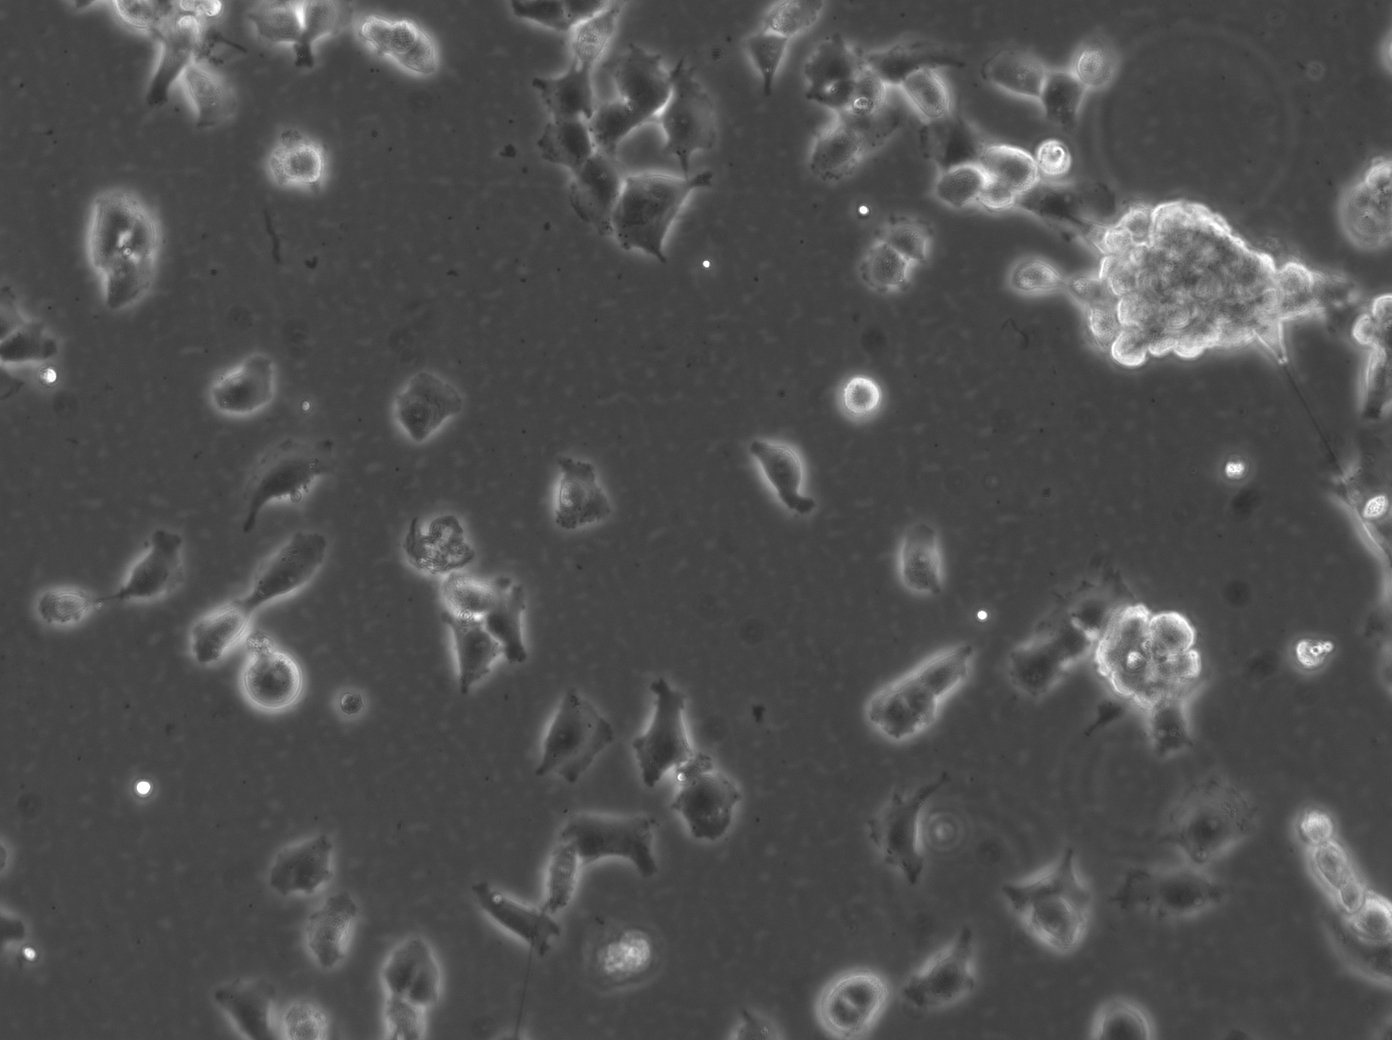 NCH690 Cells